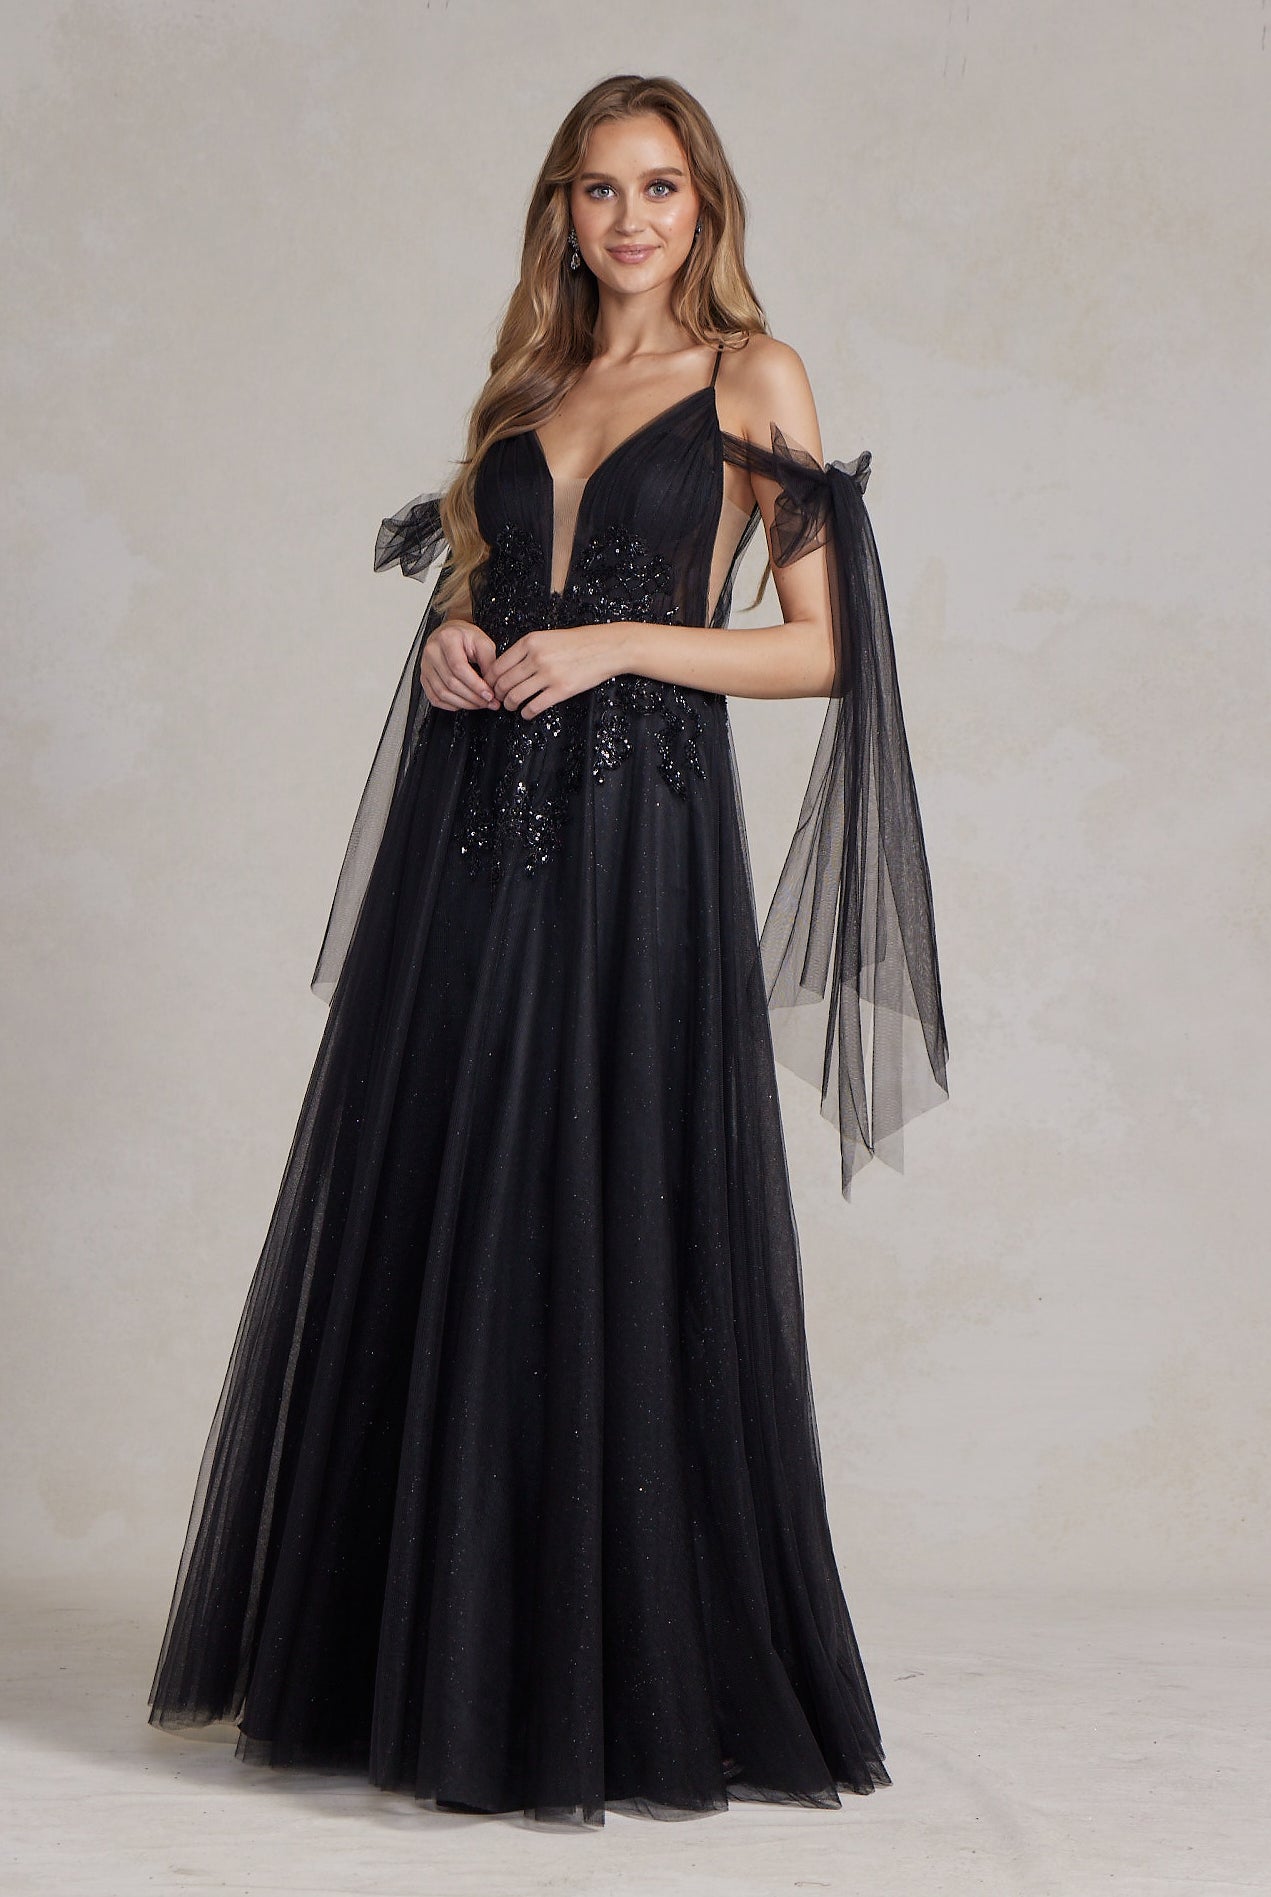 Tulle Skirt Deep Illusion V-Neck Embroidered Lace Long Prom Dress NXE1075-Prom Dress-smcfashion.com